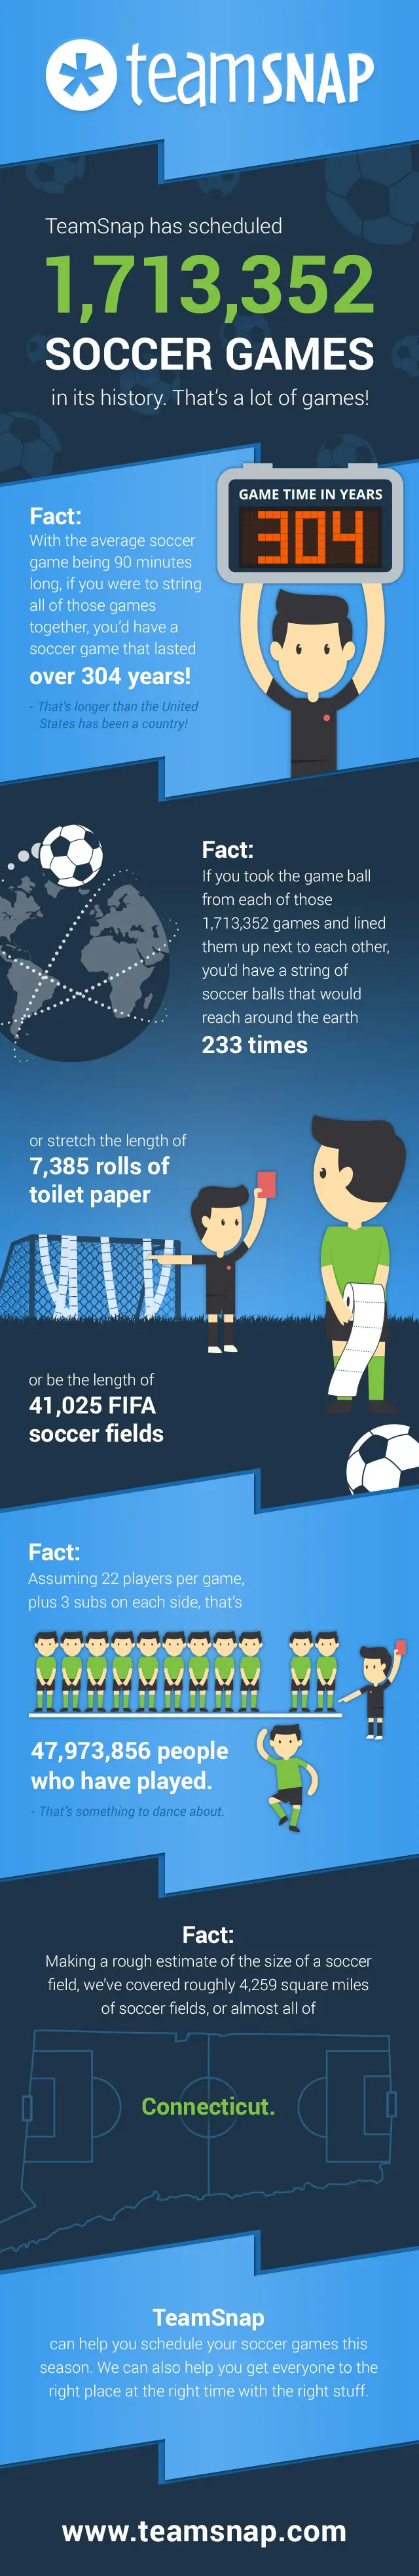 Featured image: Infographic: TeamSnap Has Scheduled Nearly 2 Million Soccer Games!